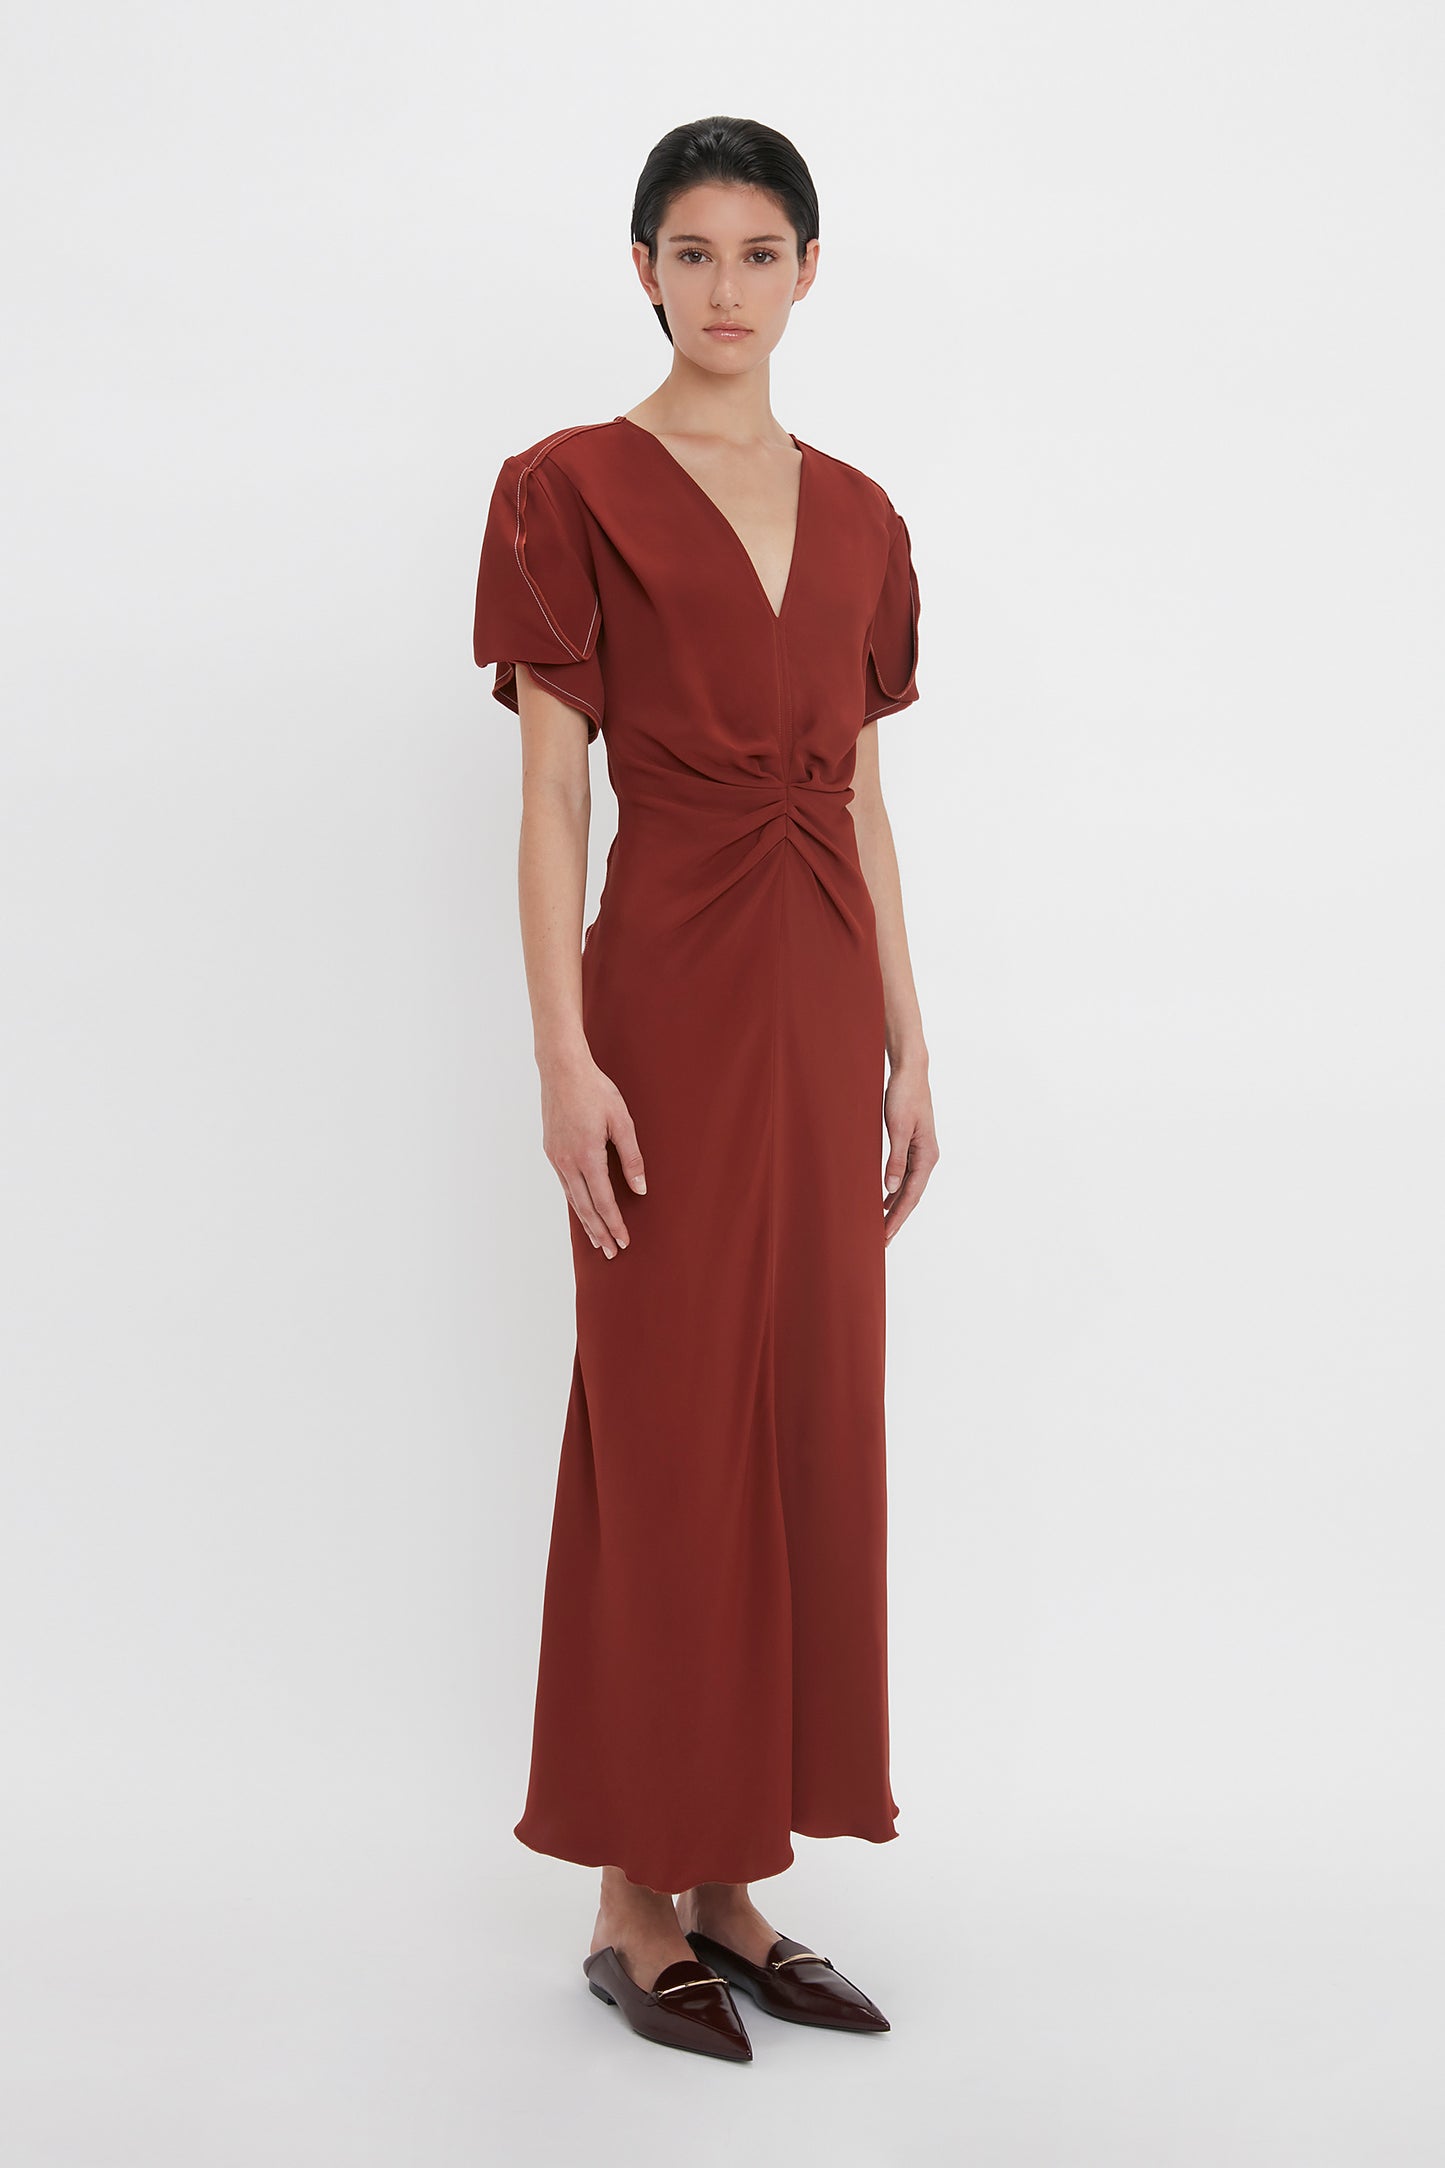 A person stands against a white background wearing a figure-flattering, deep red Gathered V-Neck Midi Dress In Russet by Victoria Beckham with short sleeves and brown pointed shoes. The dress features a waist-defining pleat detail that enhances the silhouette beautifully.